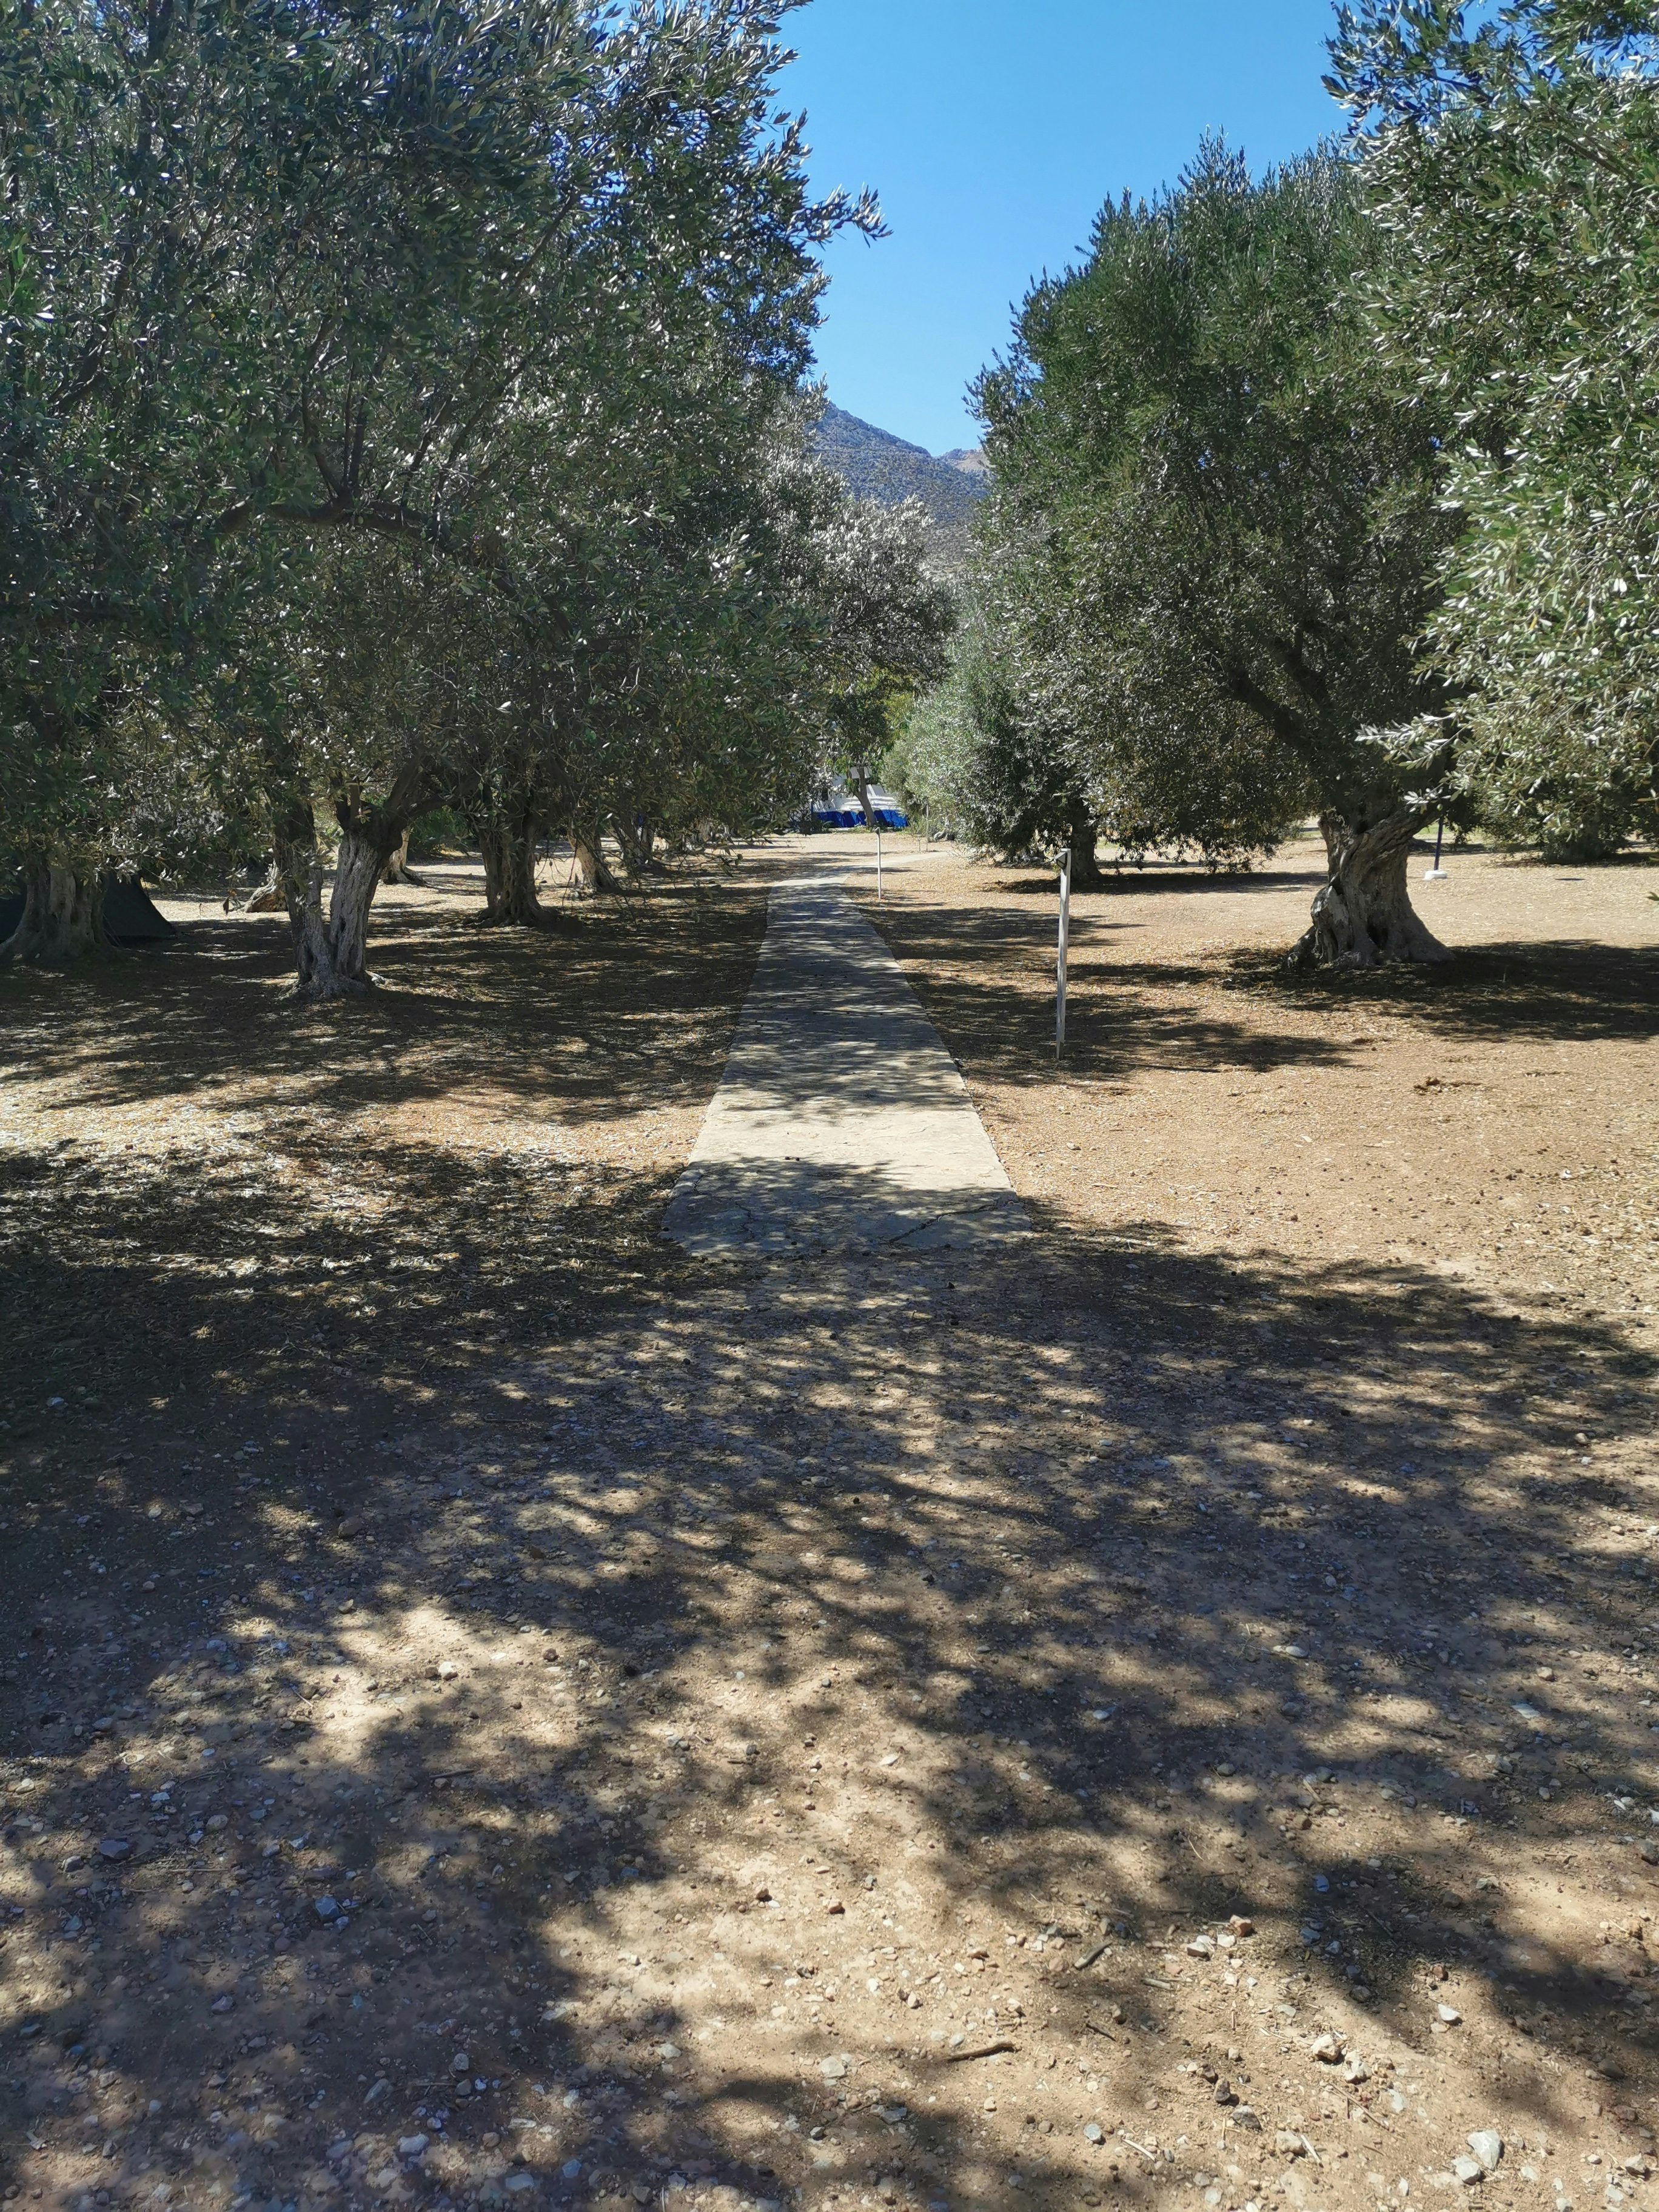 400-year-old olive grove